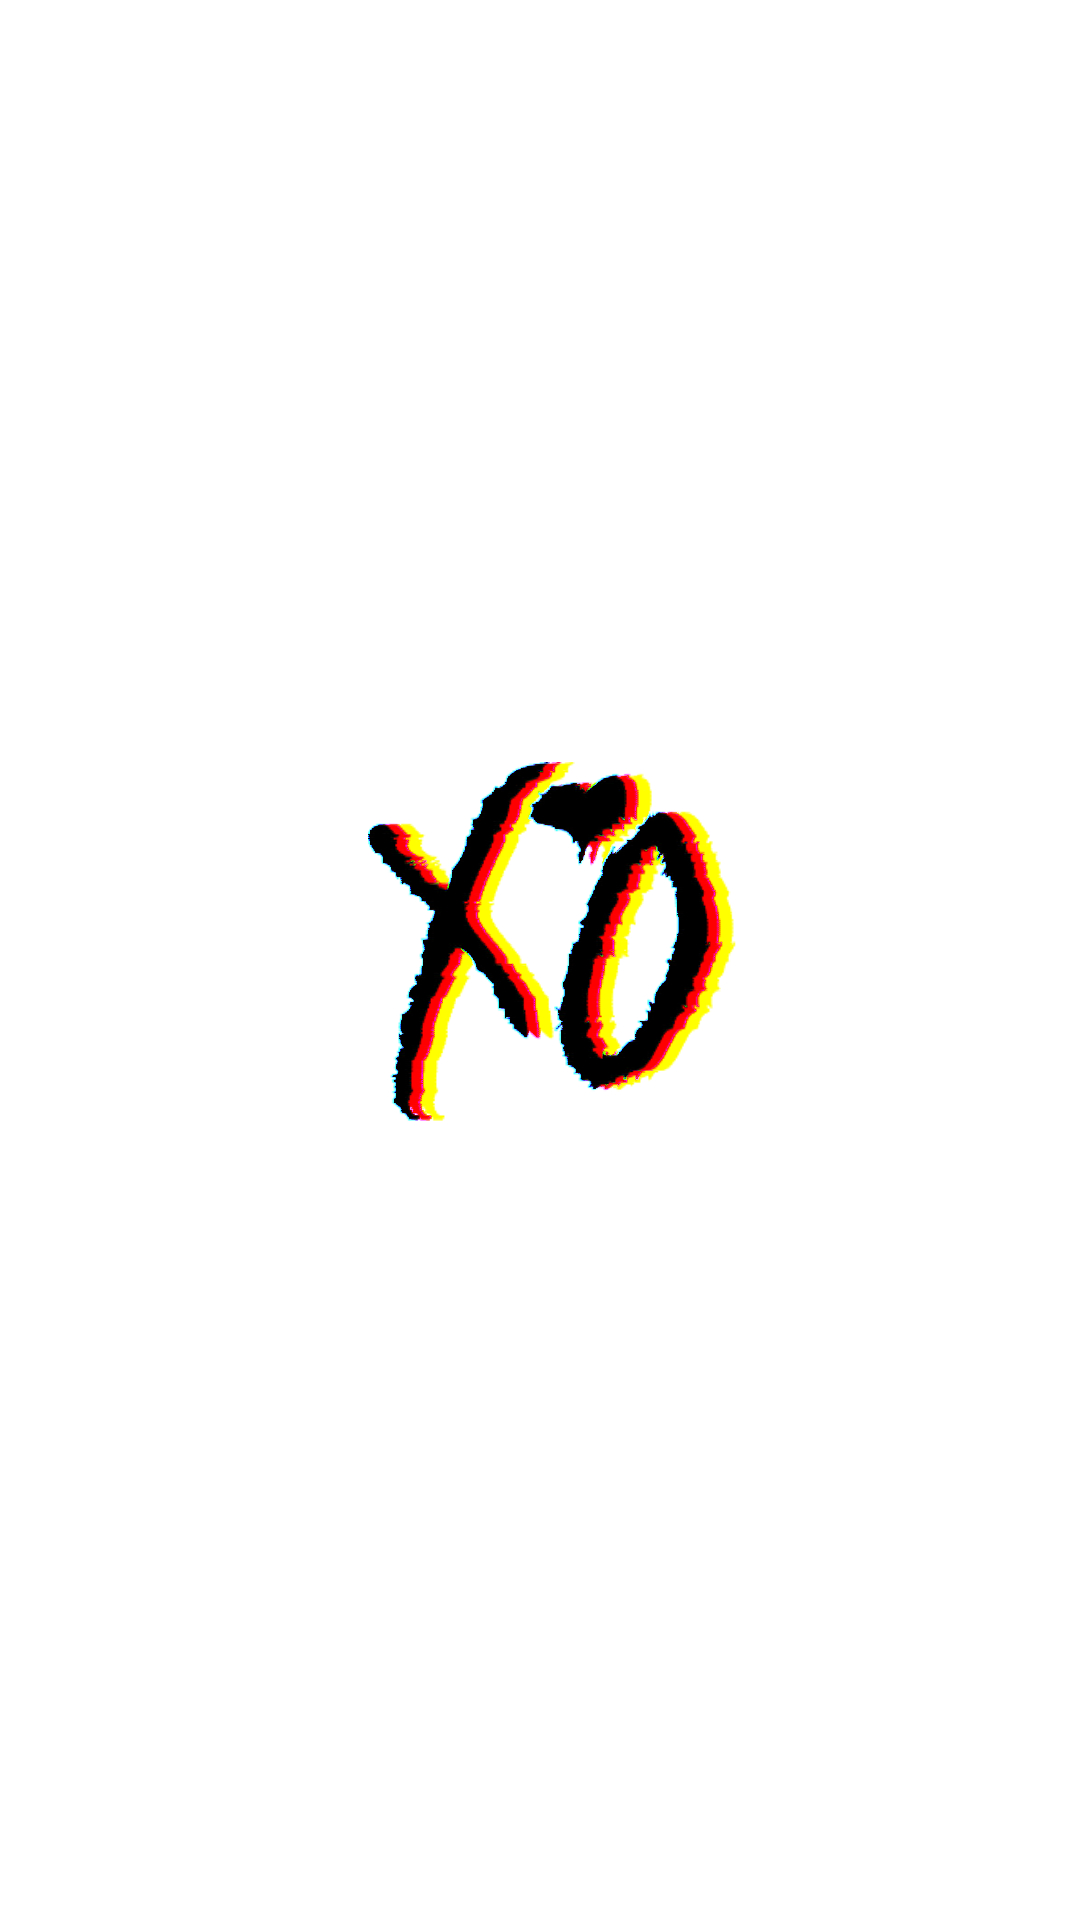 1080x1920 xo //the weeknd iphone wallpaper | The weeknd background, Creepy photography, The weeknd